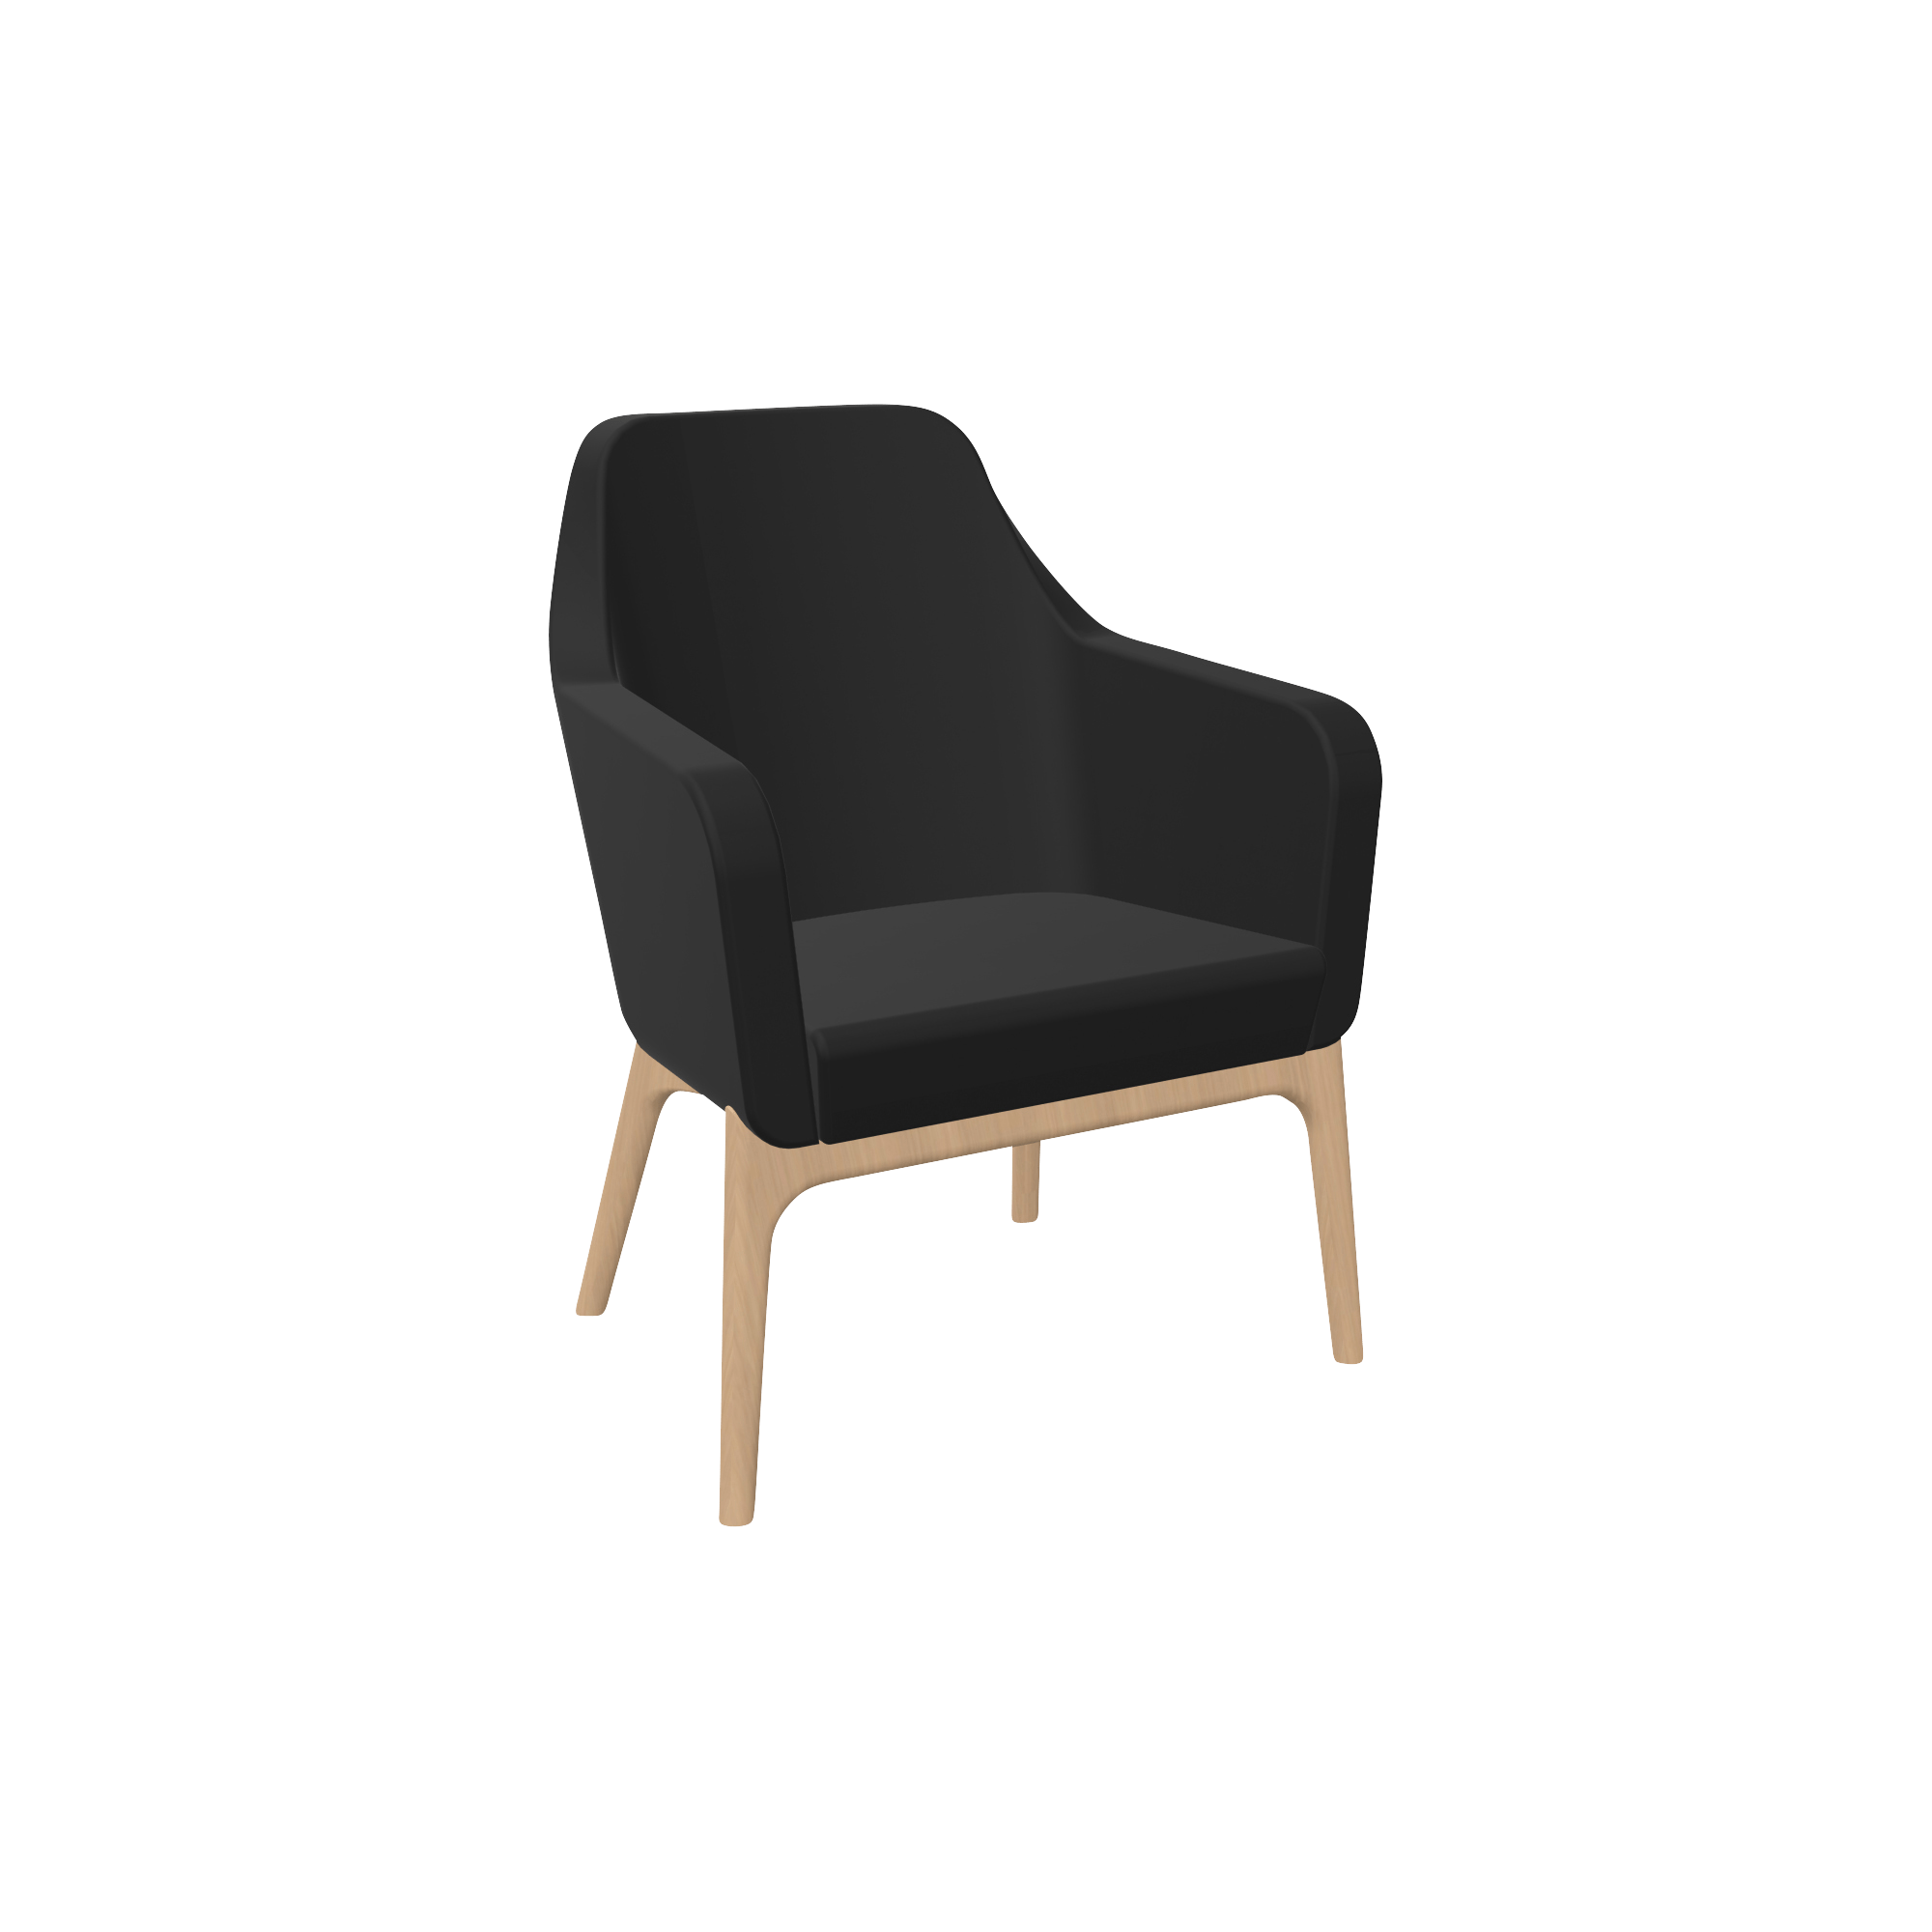 Black upholstered seat with four wooden legs